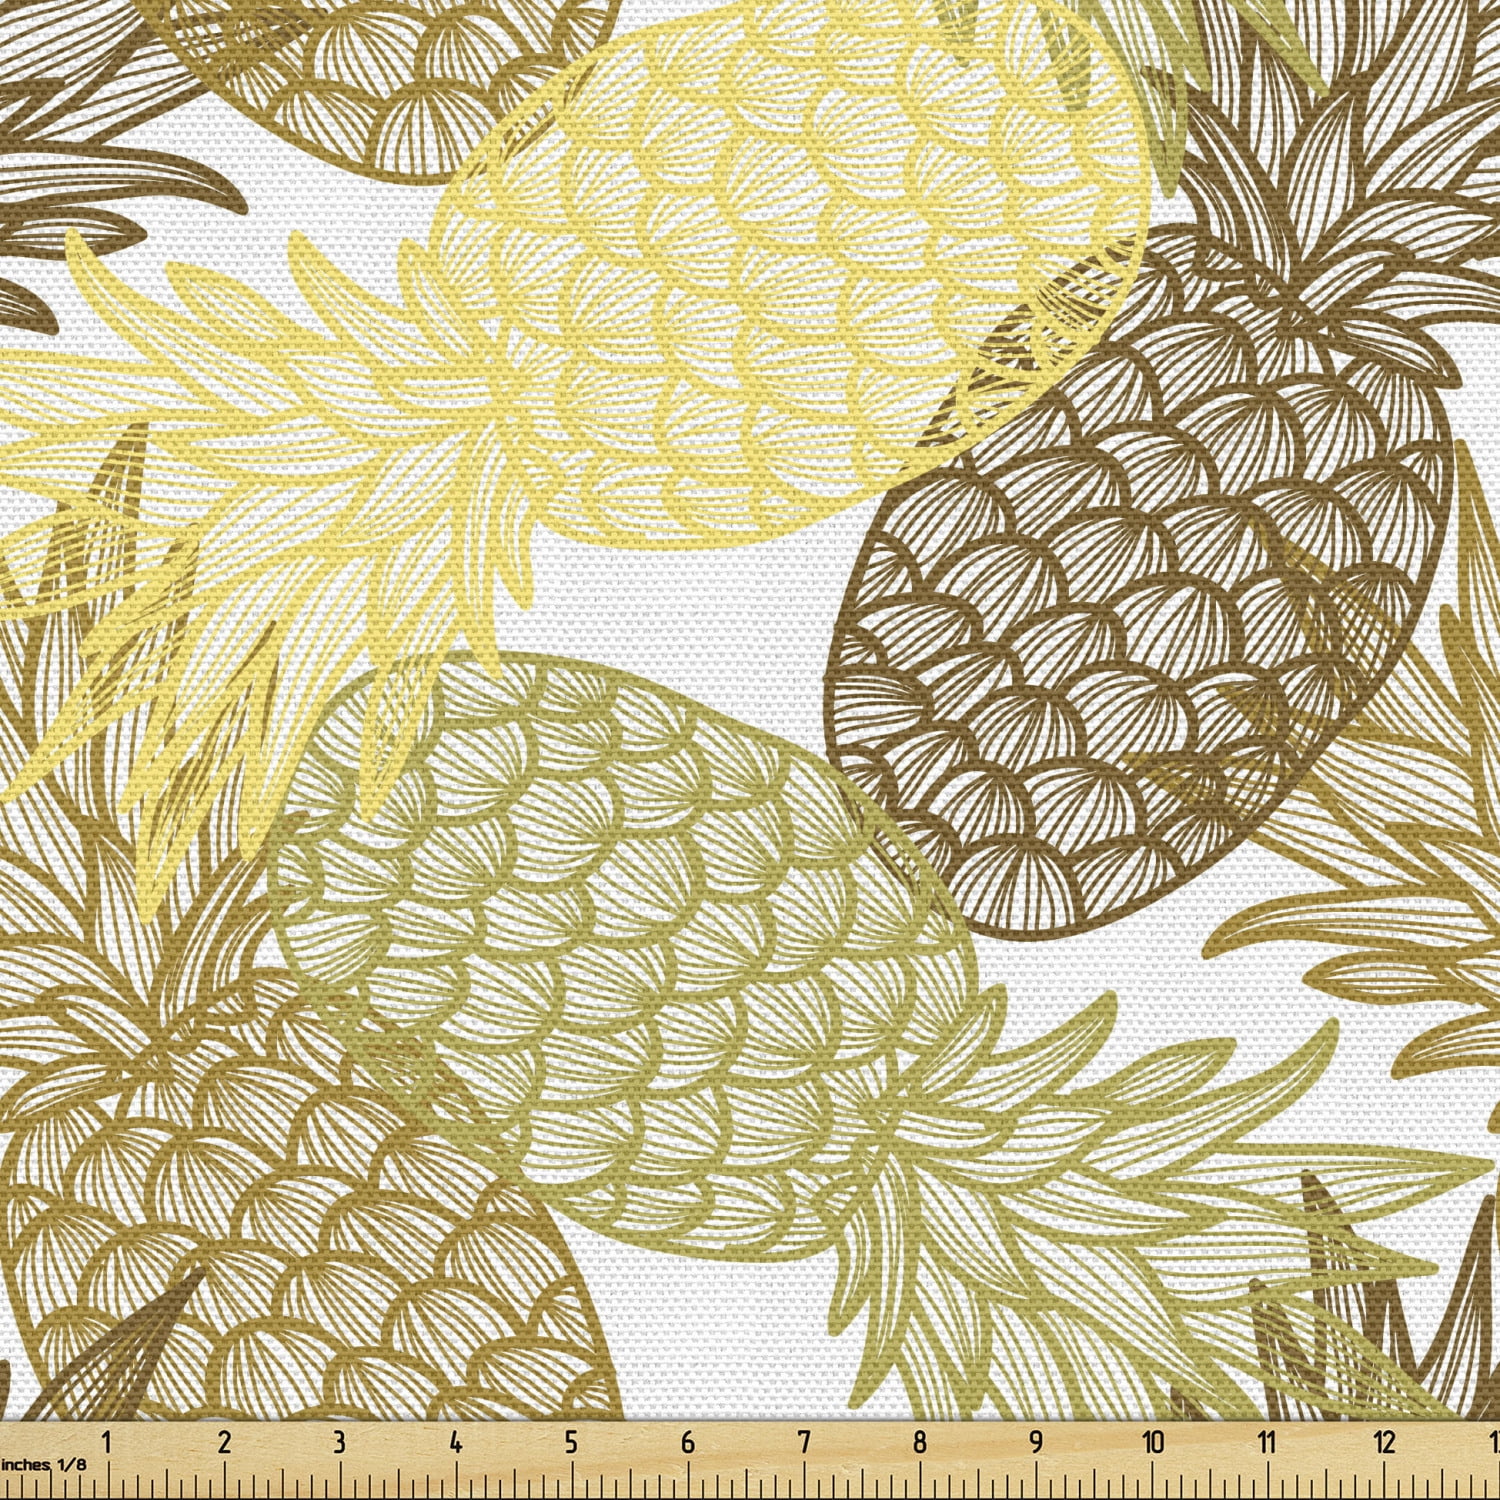 Printed Upholstery Fabric Checkered Pineapple Upholstery Fabric Fabric by the Yard Checked Pineapple Fabric Pineapple Canvas Fabric